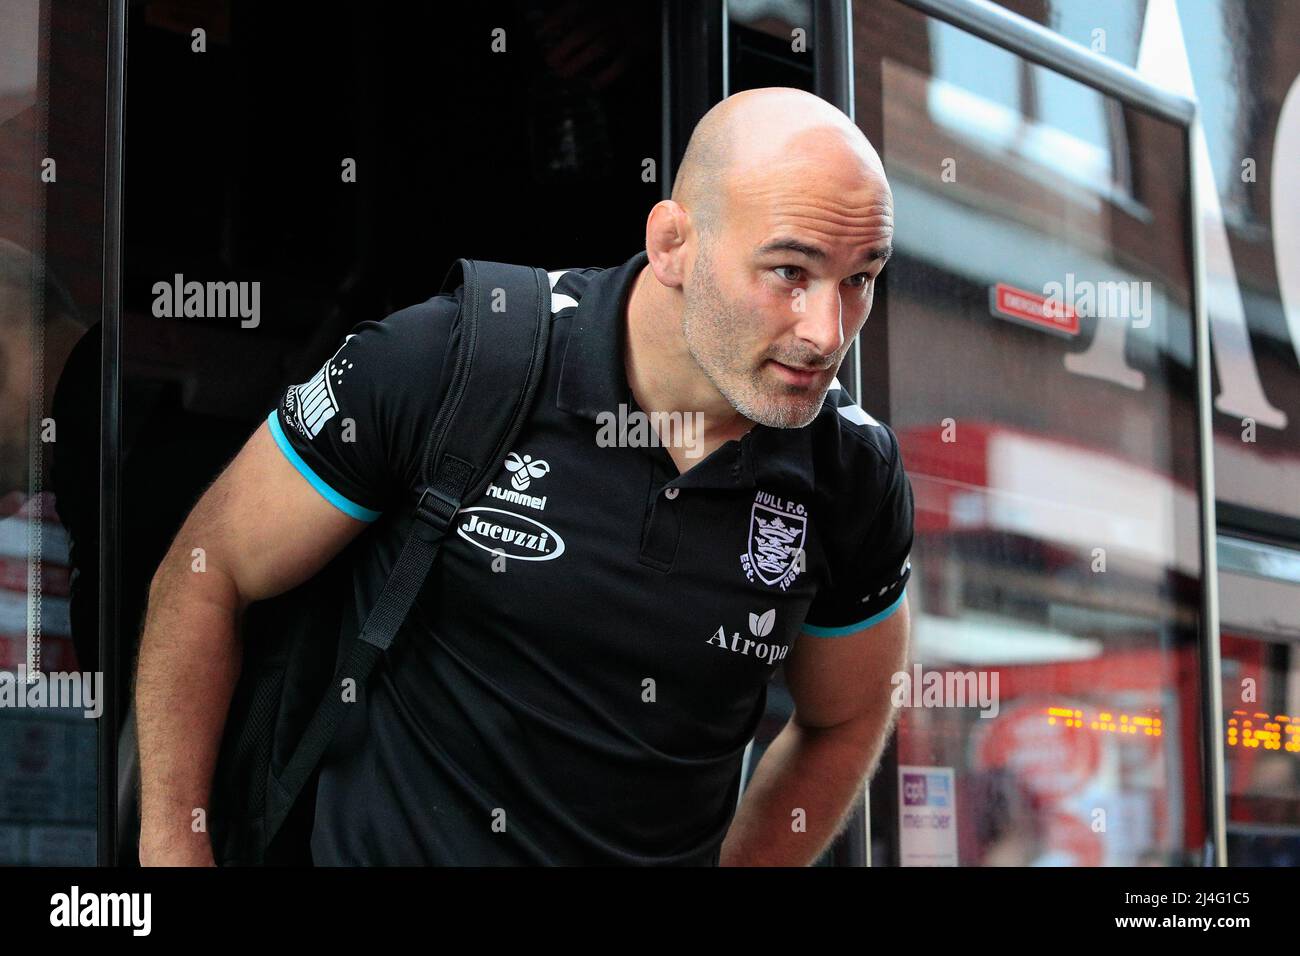 Kingston Upon Hull, UK. 15th Apr, 2022. Danny Houghton #9 of Hull FC arrives at The Sewell Group Craven Park Stadium ahead of today's game in Kingston upon Hull, United Kingdom on 4/15/2022. (Photo by James Heaton/News Images/Sipa USA) Credit: Sipa USA/Alamy Live News Stock Photo